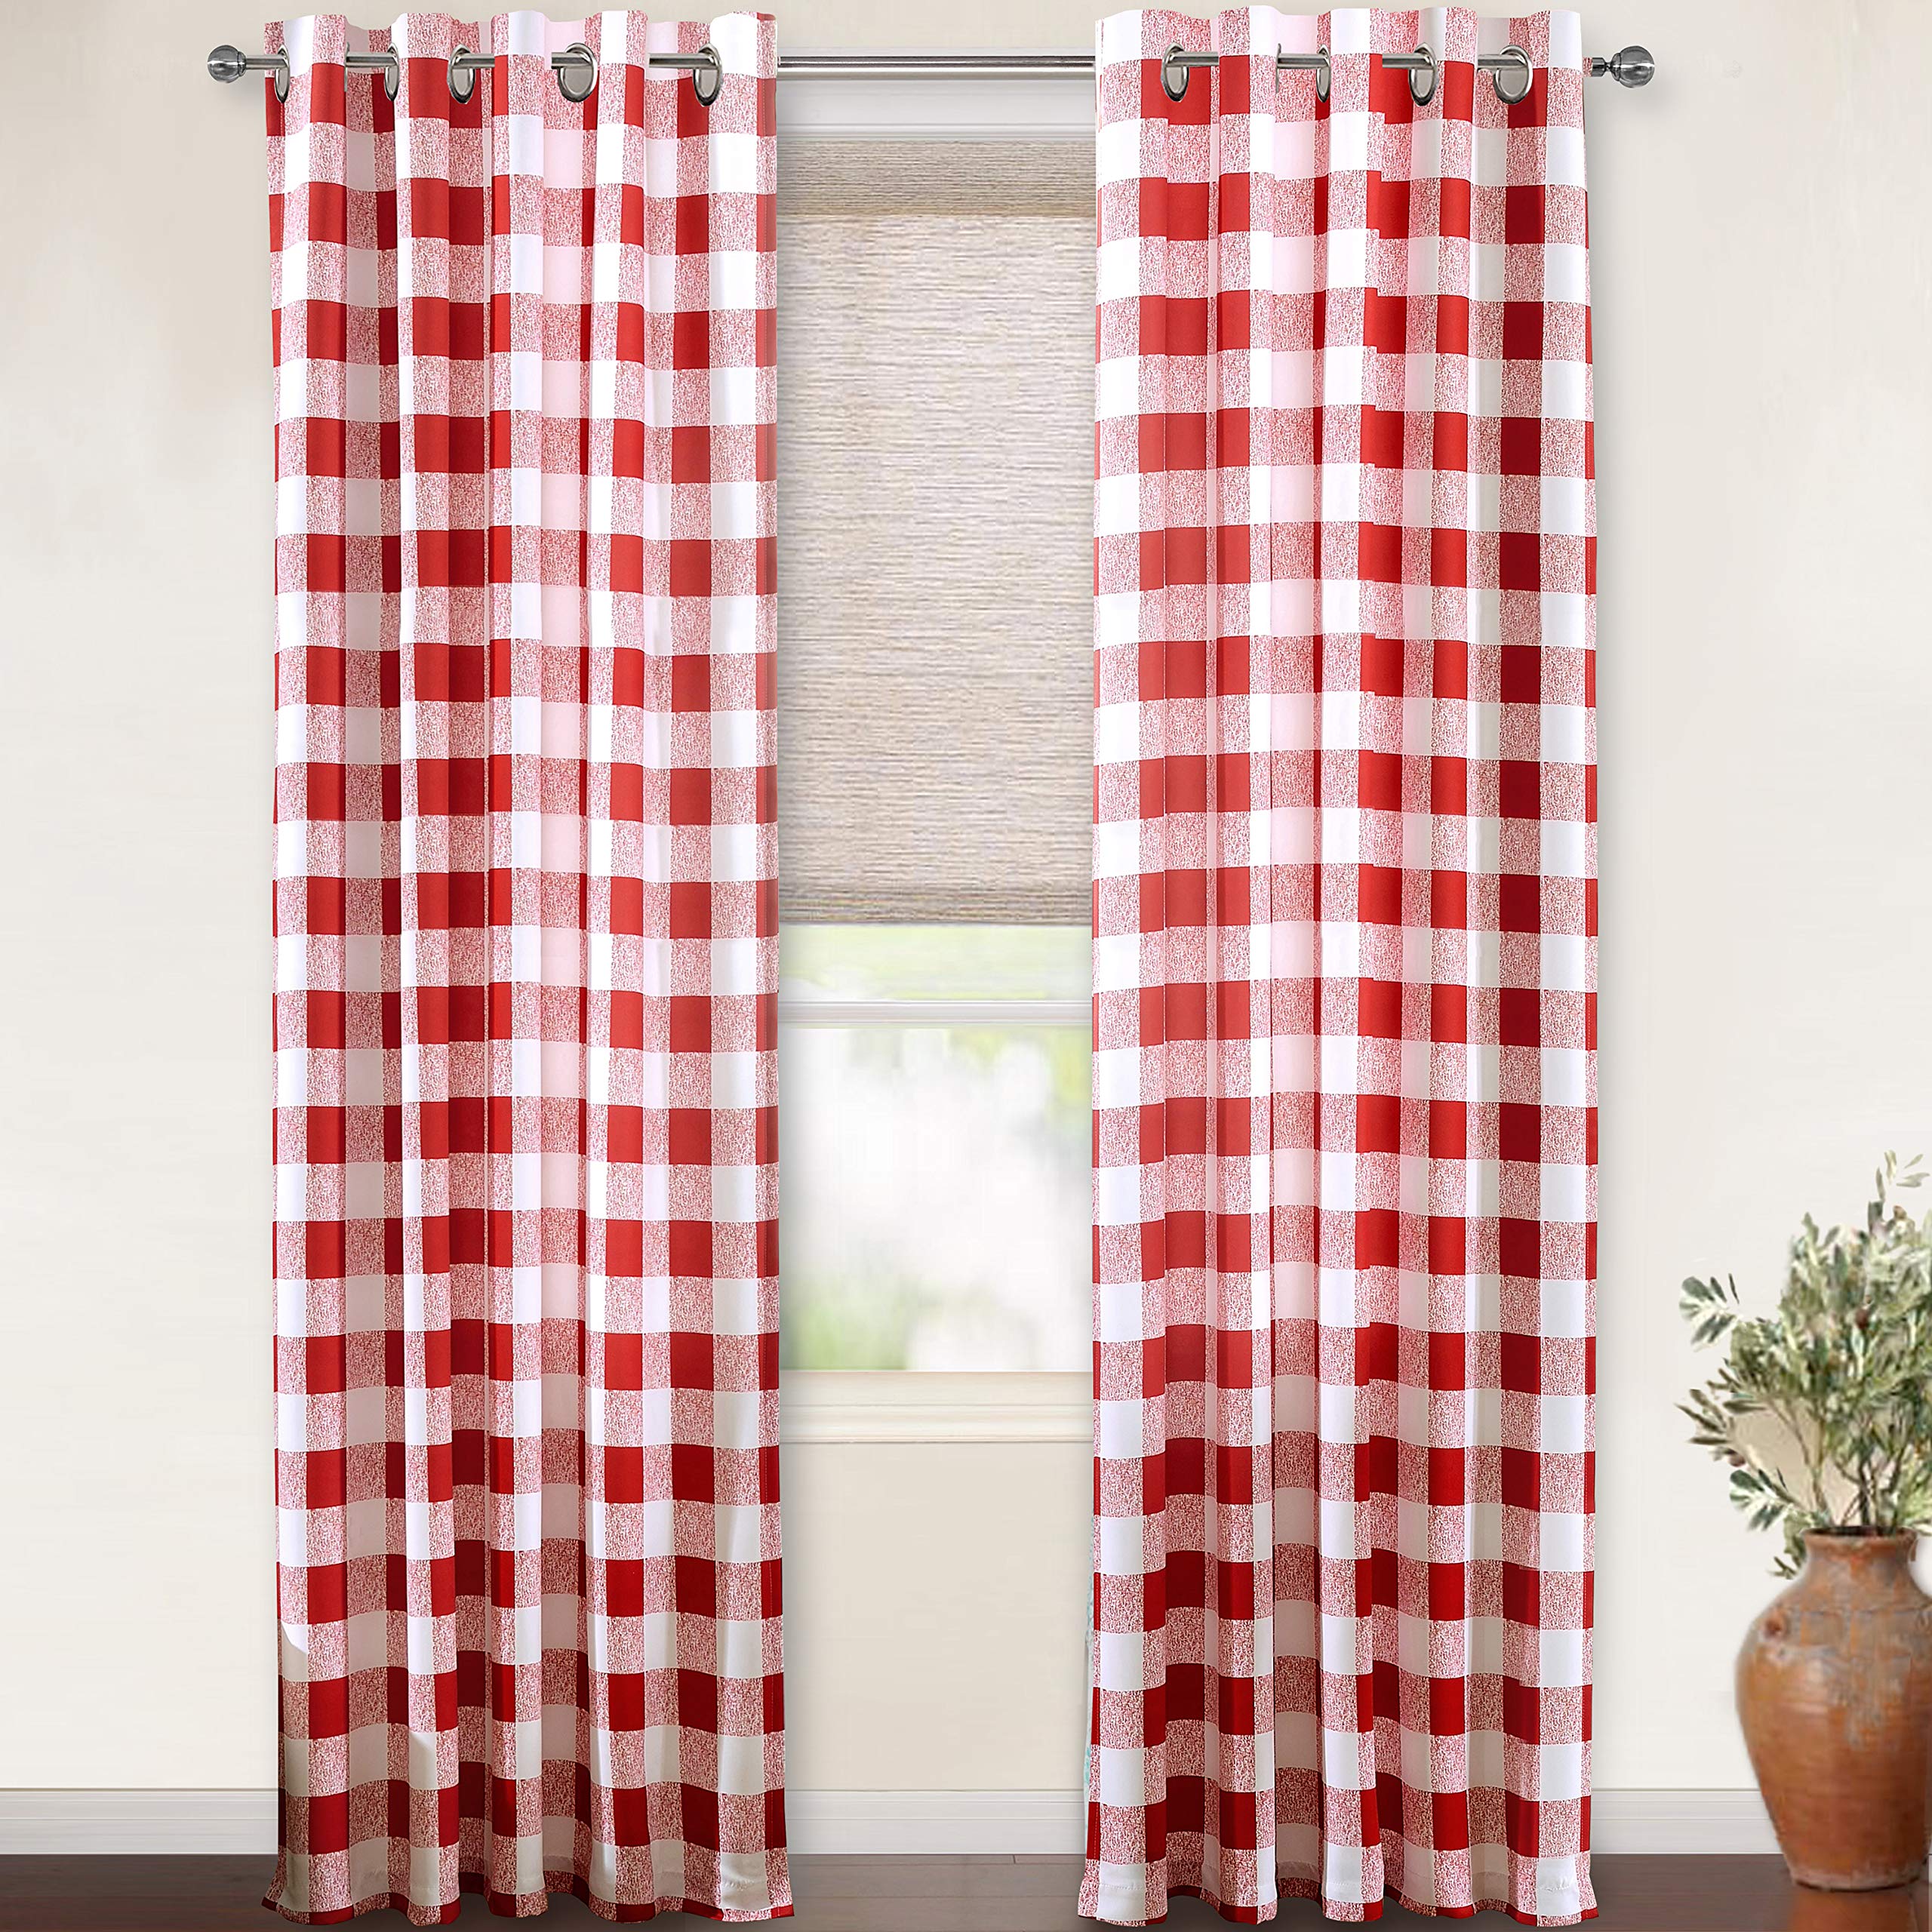 DriftAway Buffalo Plaid Check Curtains Red and White Buffalo Checkered Extra Long Blackout Curtains 2 Panel Set Farmhouse Gromme